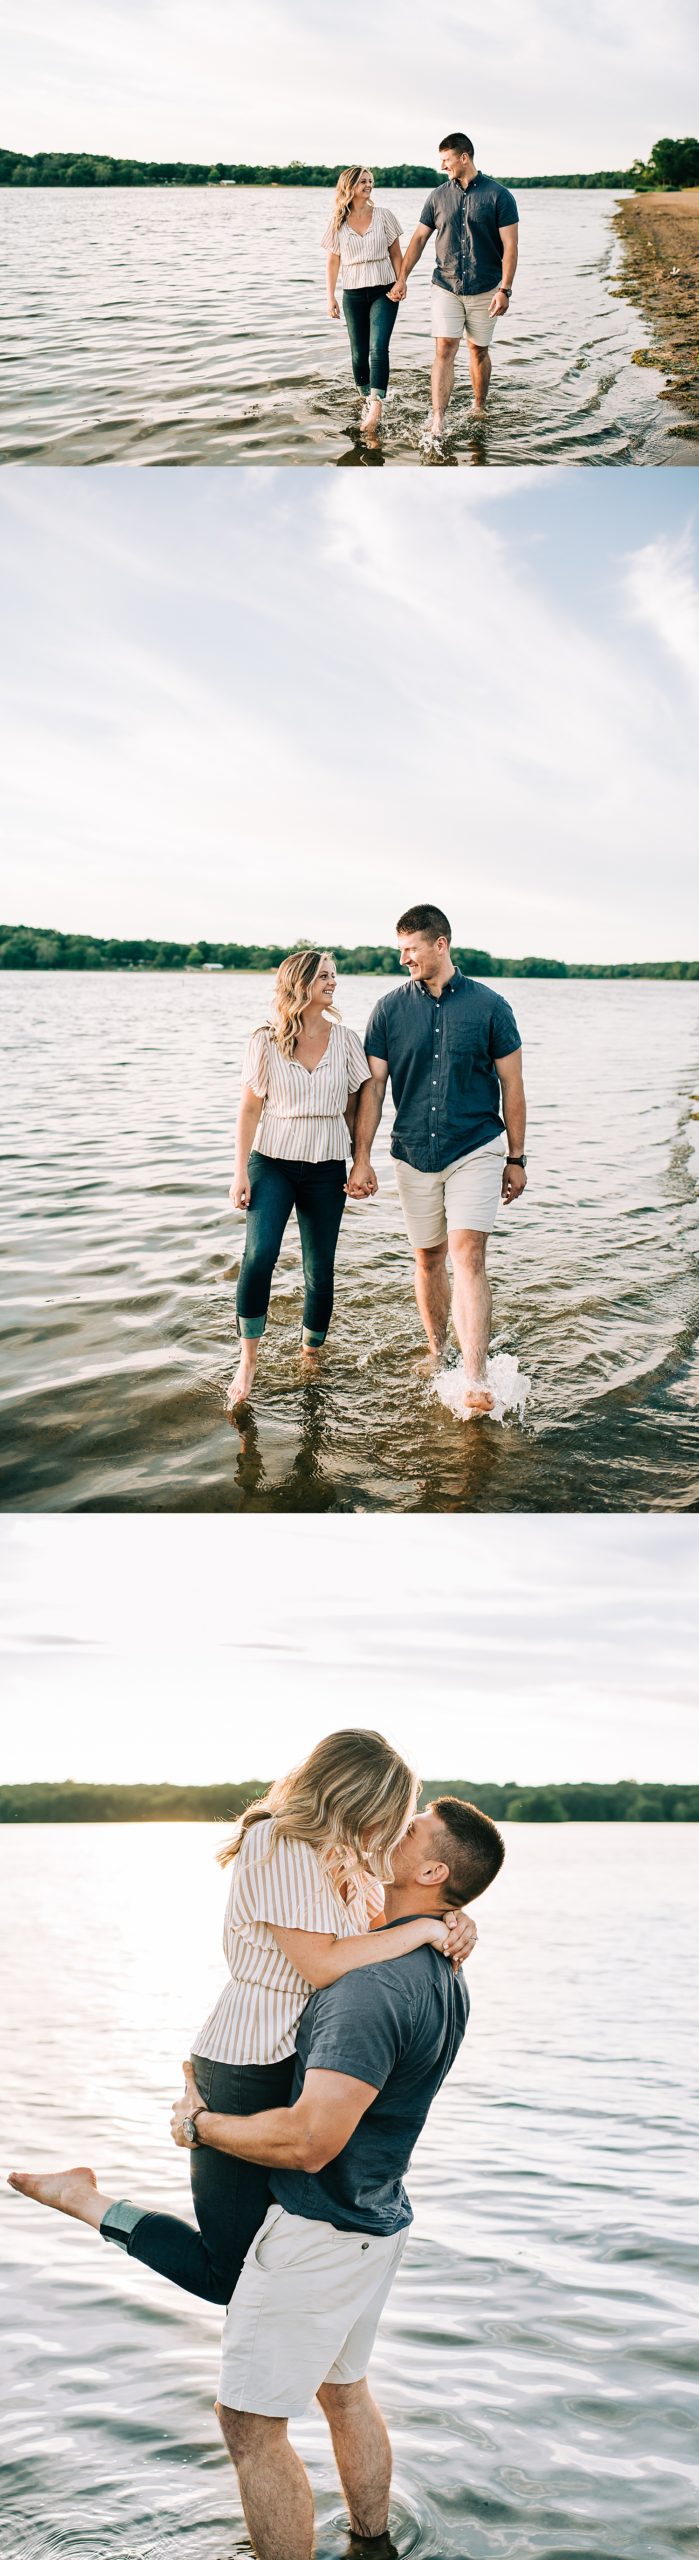 splashing in the water of Milford engagement session